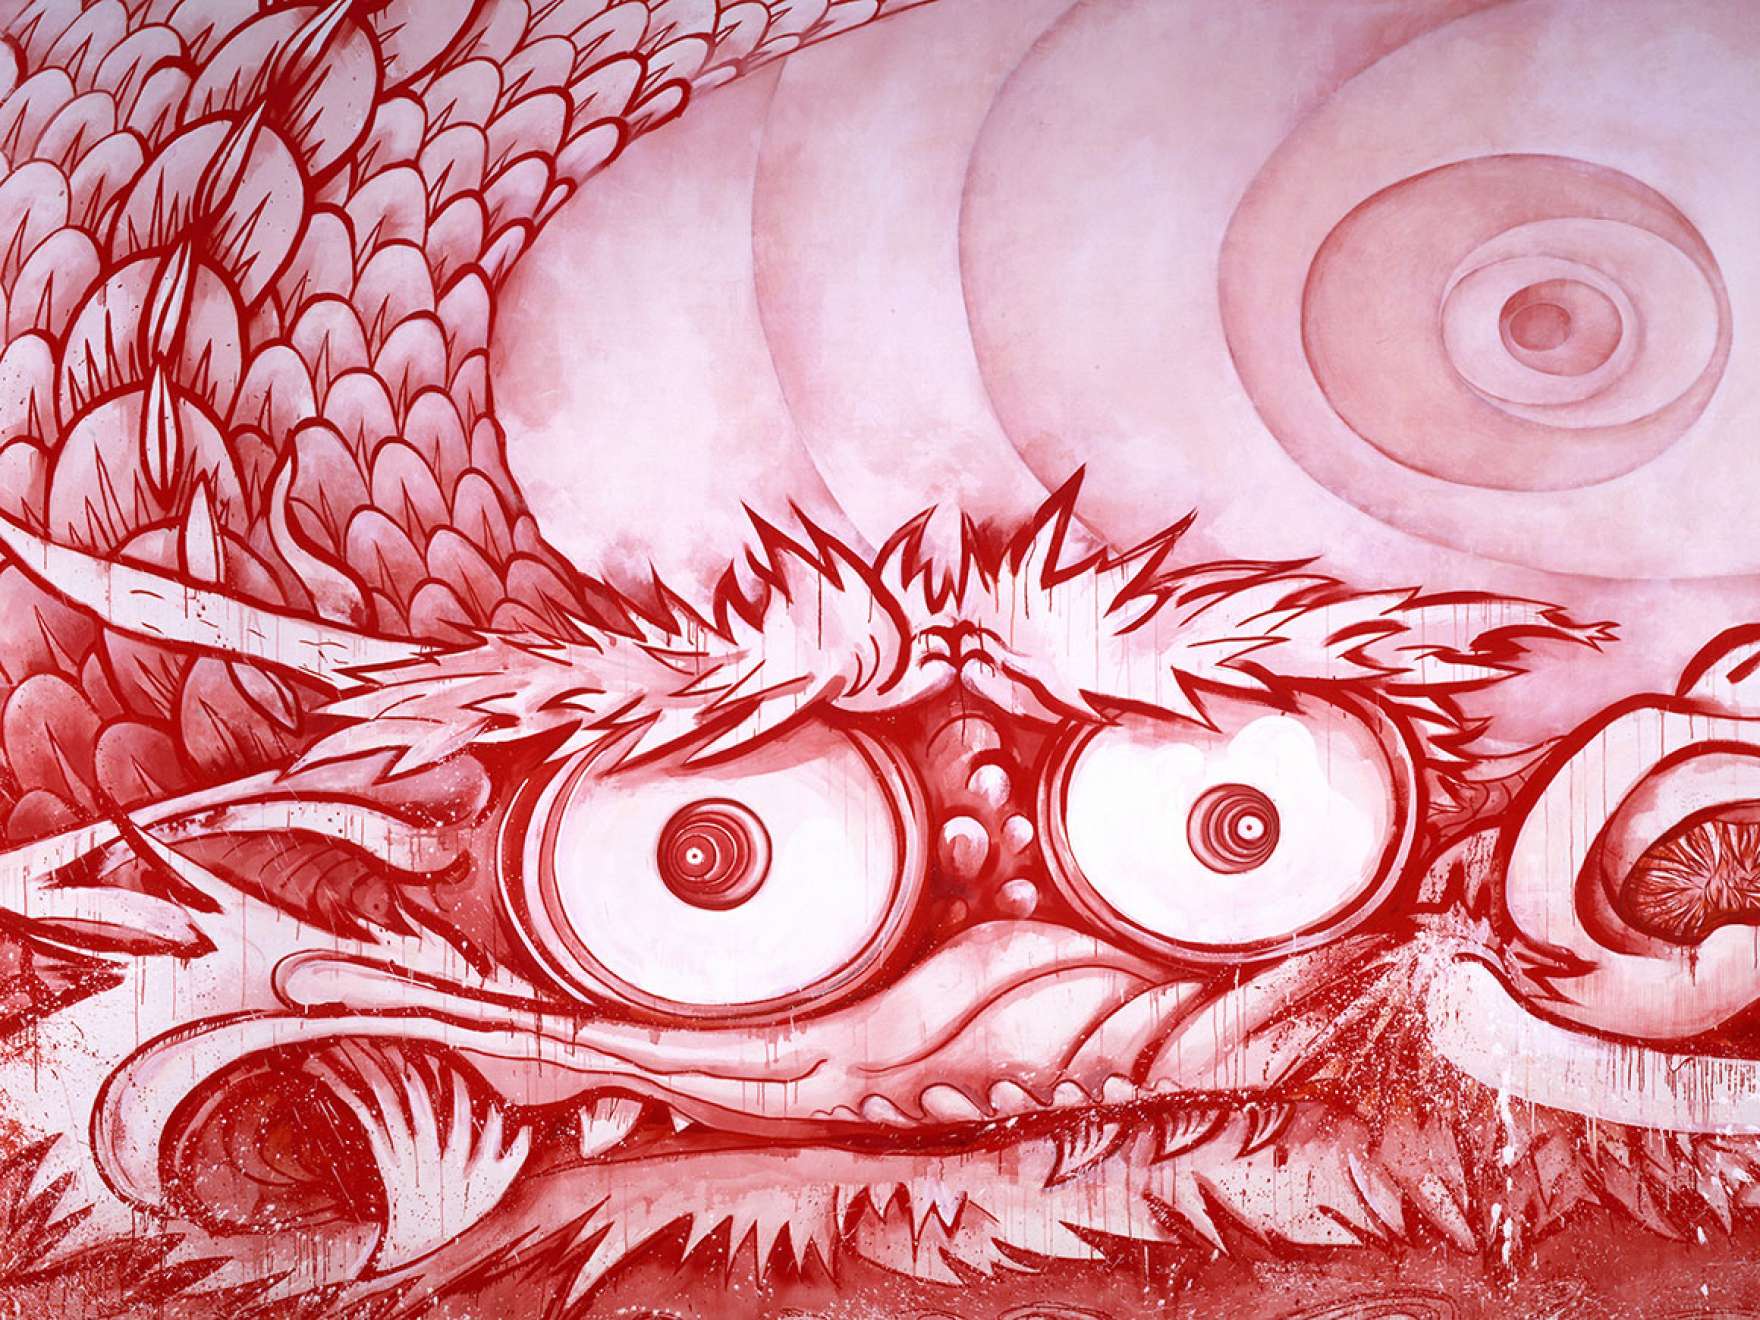 Takashi Murakami, ‘Dragon in Clouds—Red Mutation: The version I painted myself in annoyance after Professor Nobuo Tsuji told me, “Why don’t you paint something yourself for once?”’ (detail), 2010.